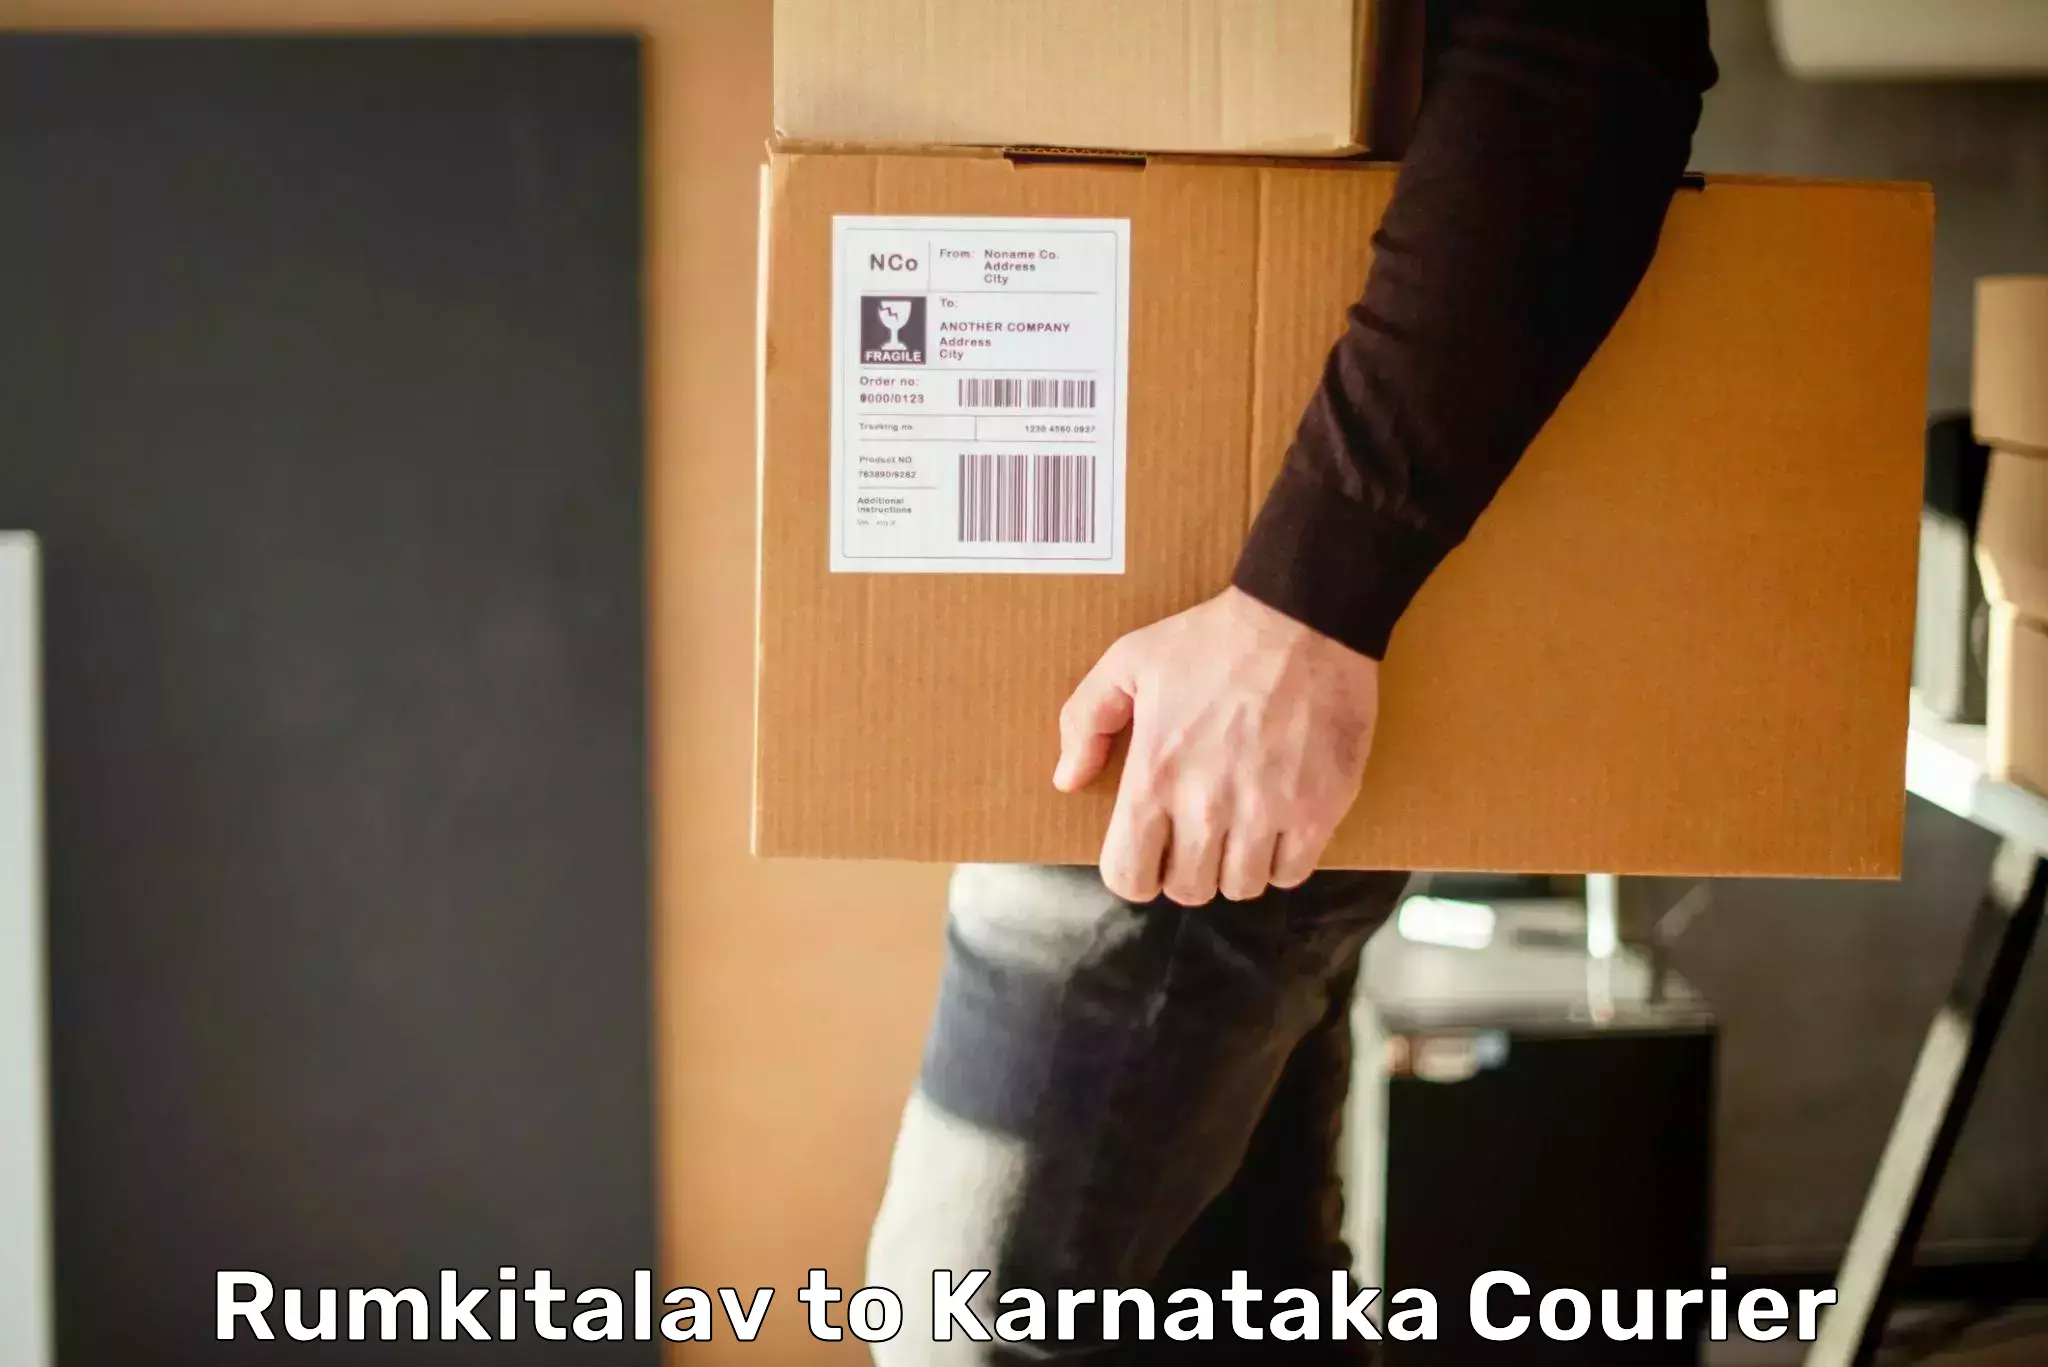 Multi-national courier services Rumkitalav to yedrami